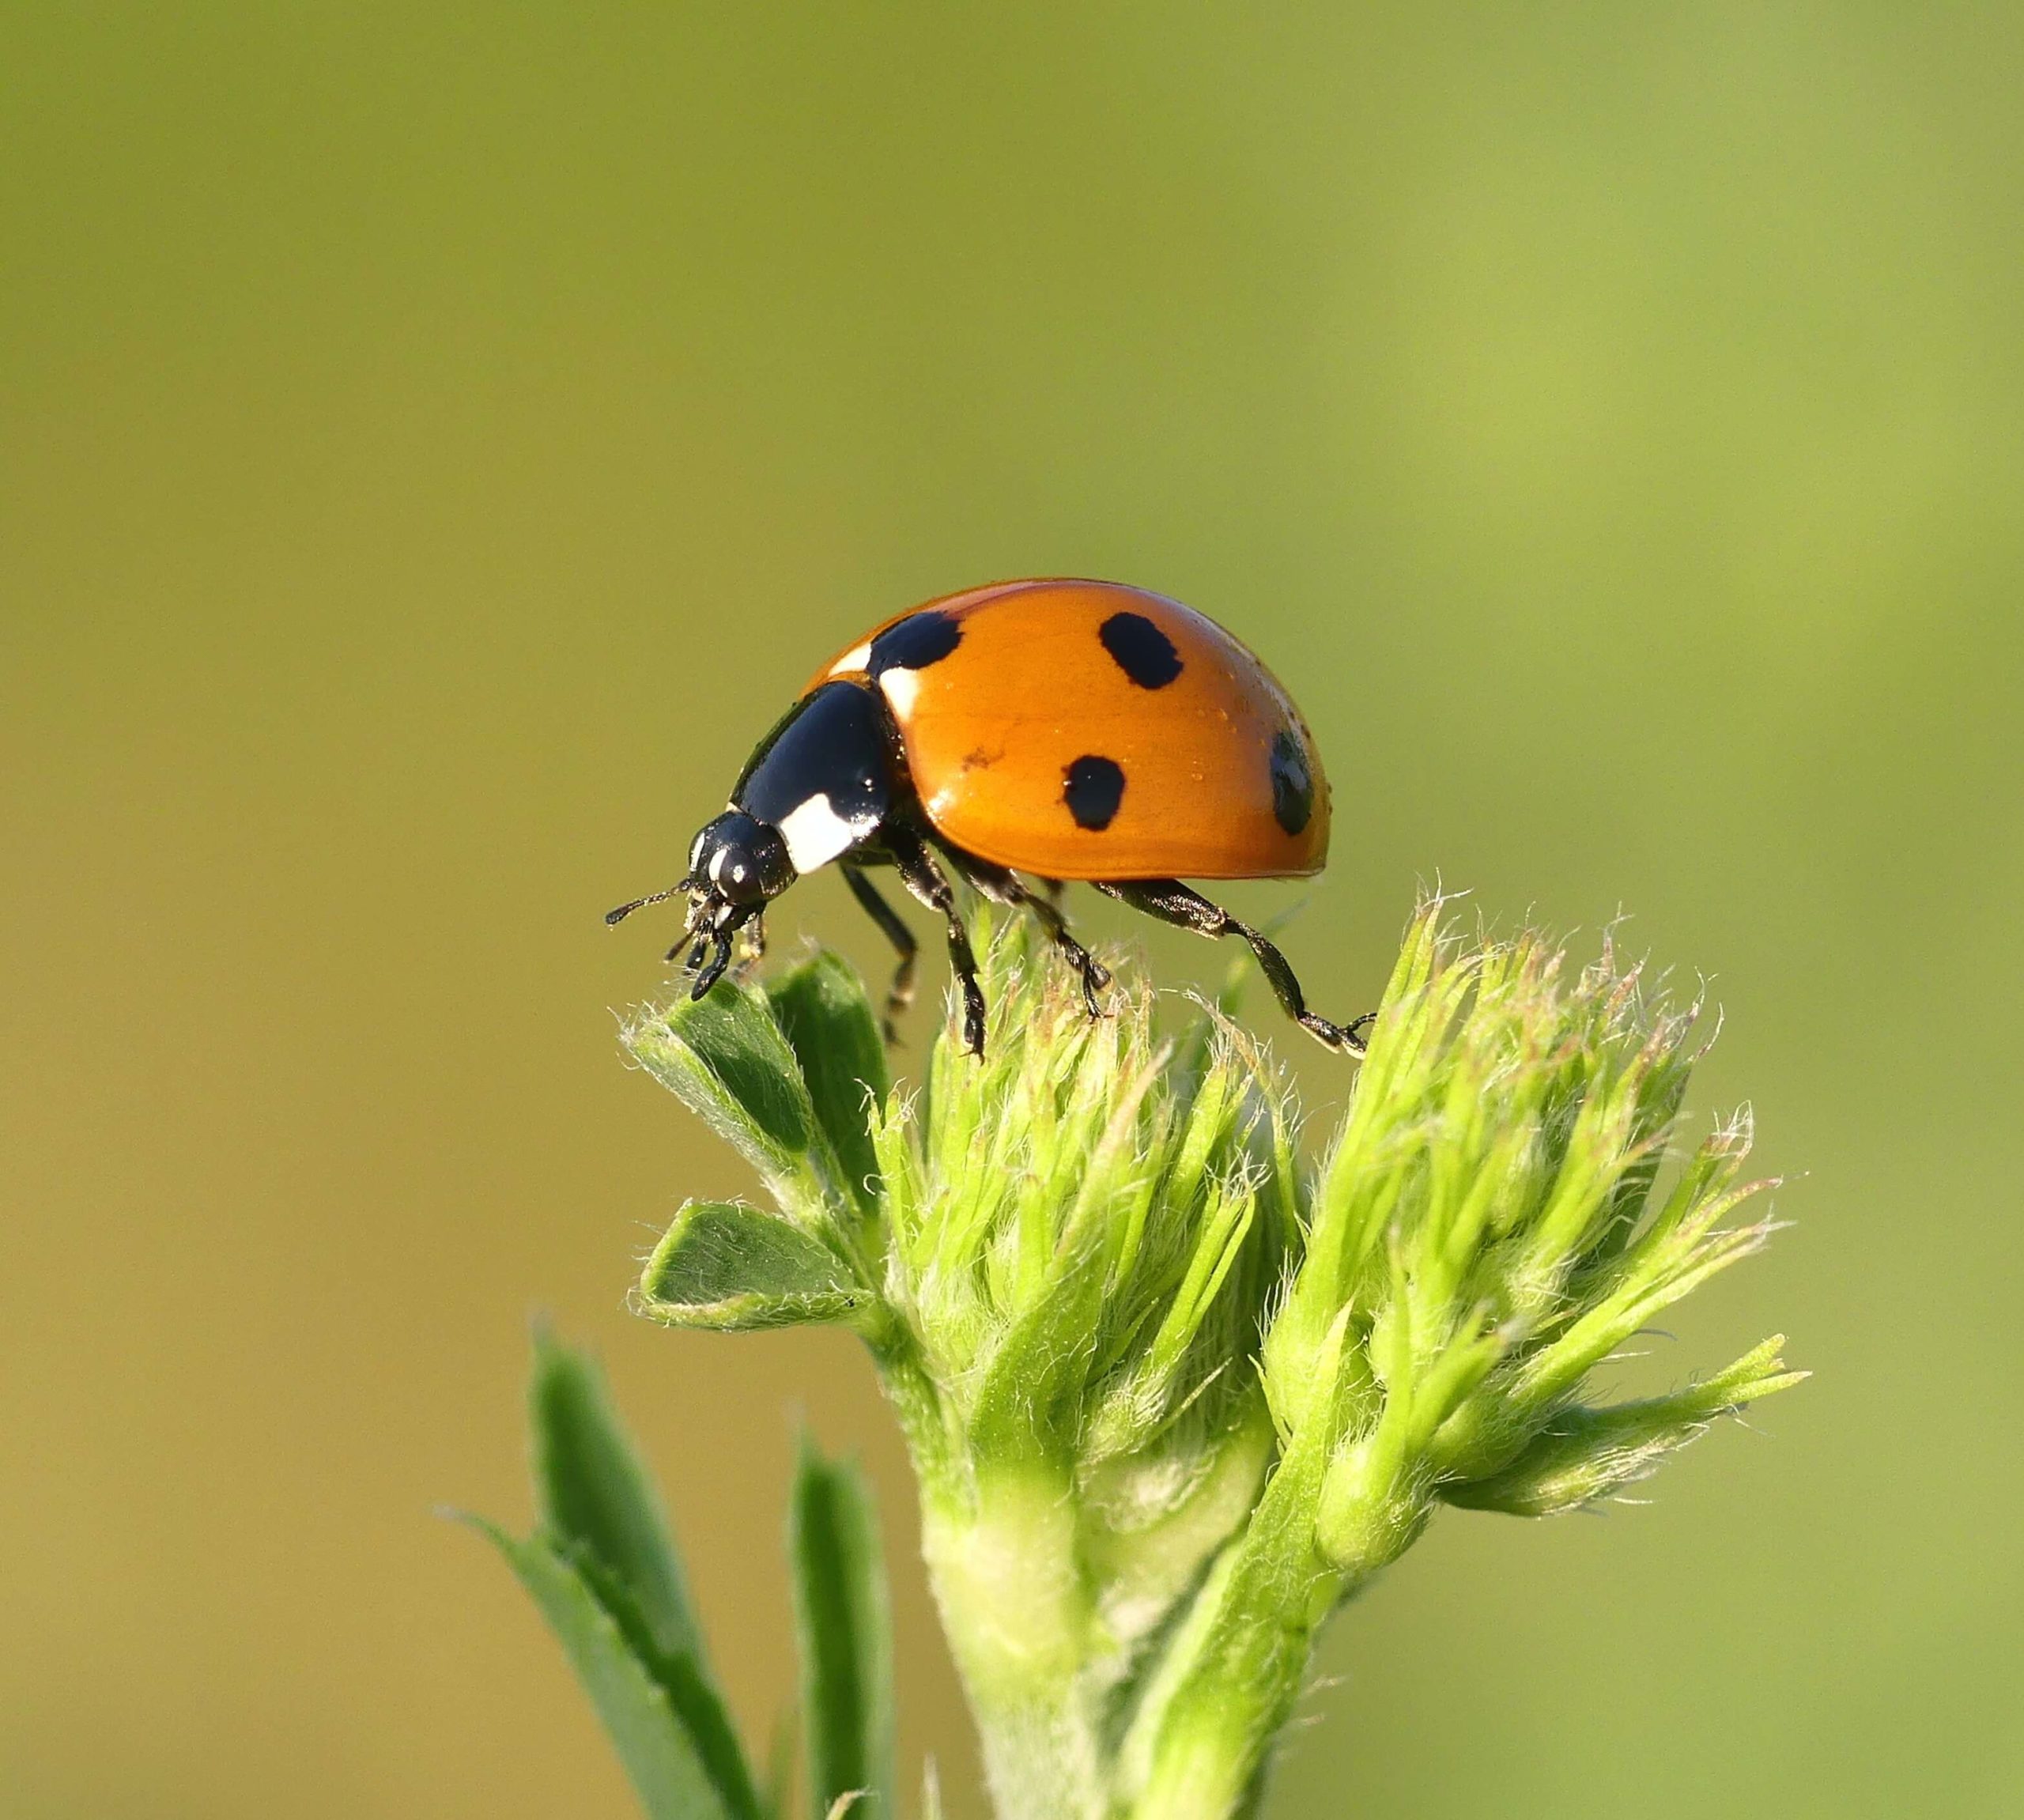 Picture of a ladybug - what do they eat?